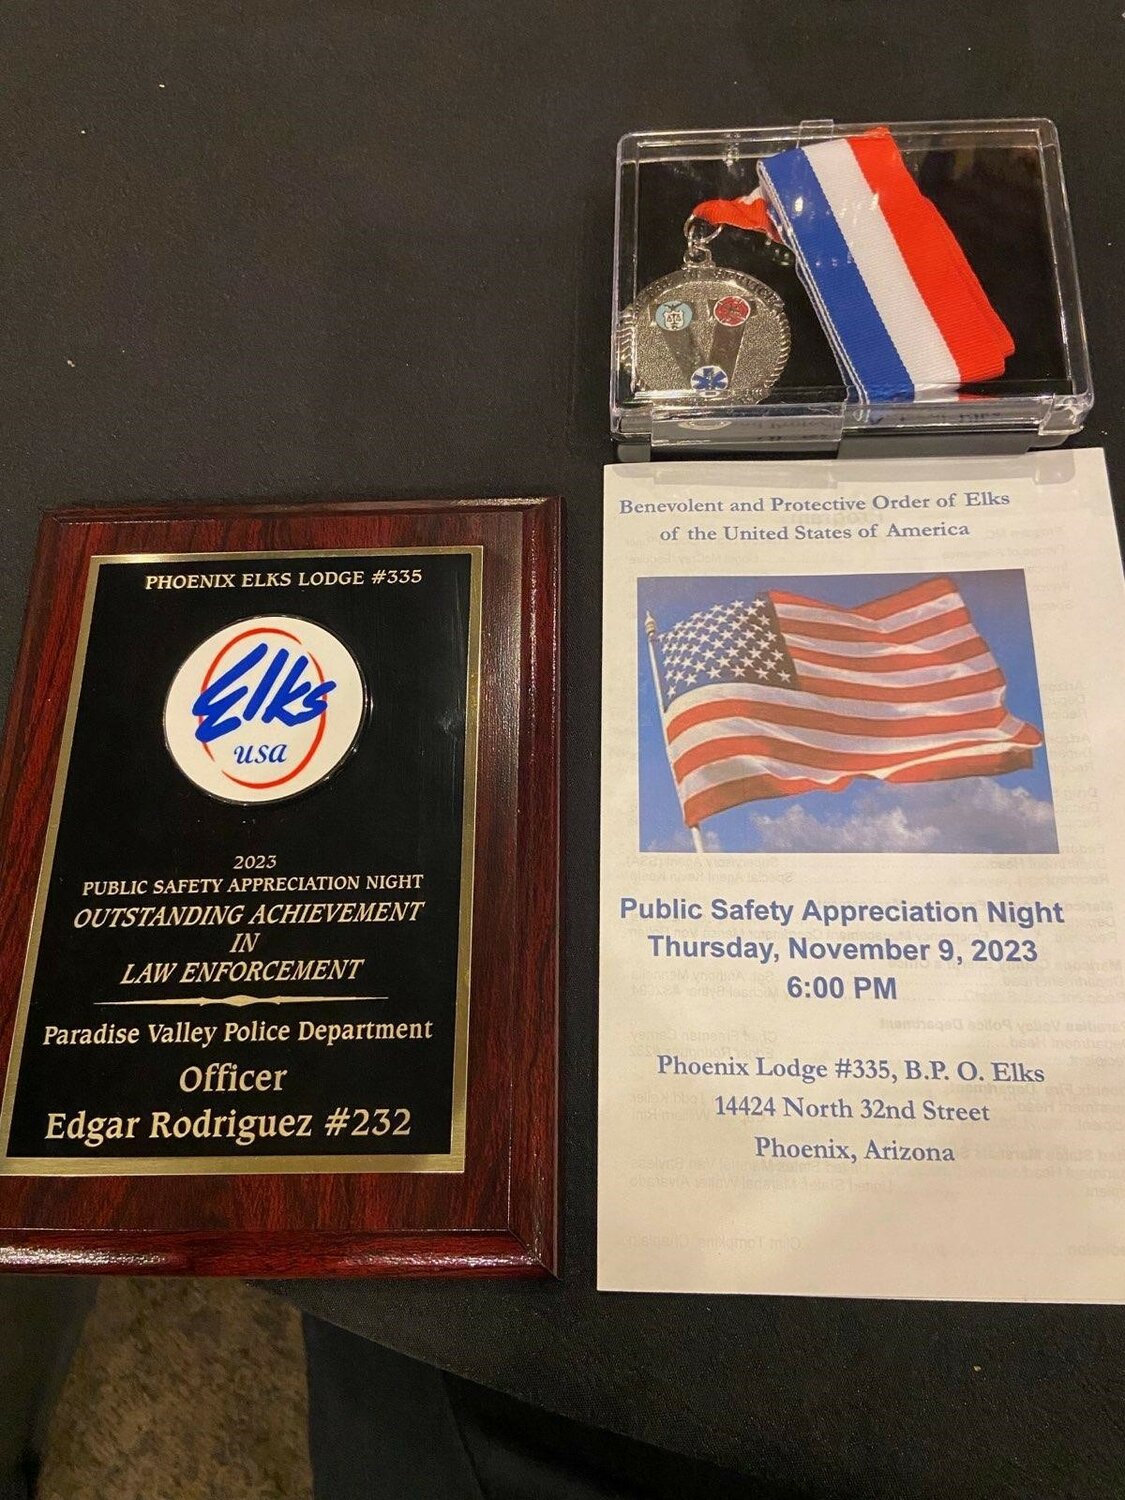 The award for “outstanding achievement in law enforcement” from Phoenix Elks Lodge Public Safety Appreciation Night.